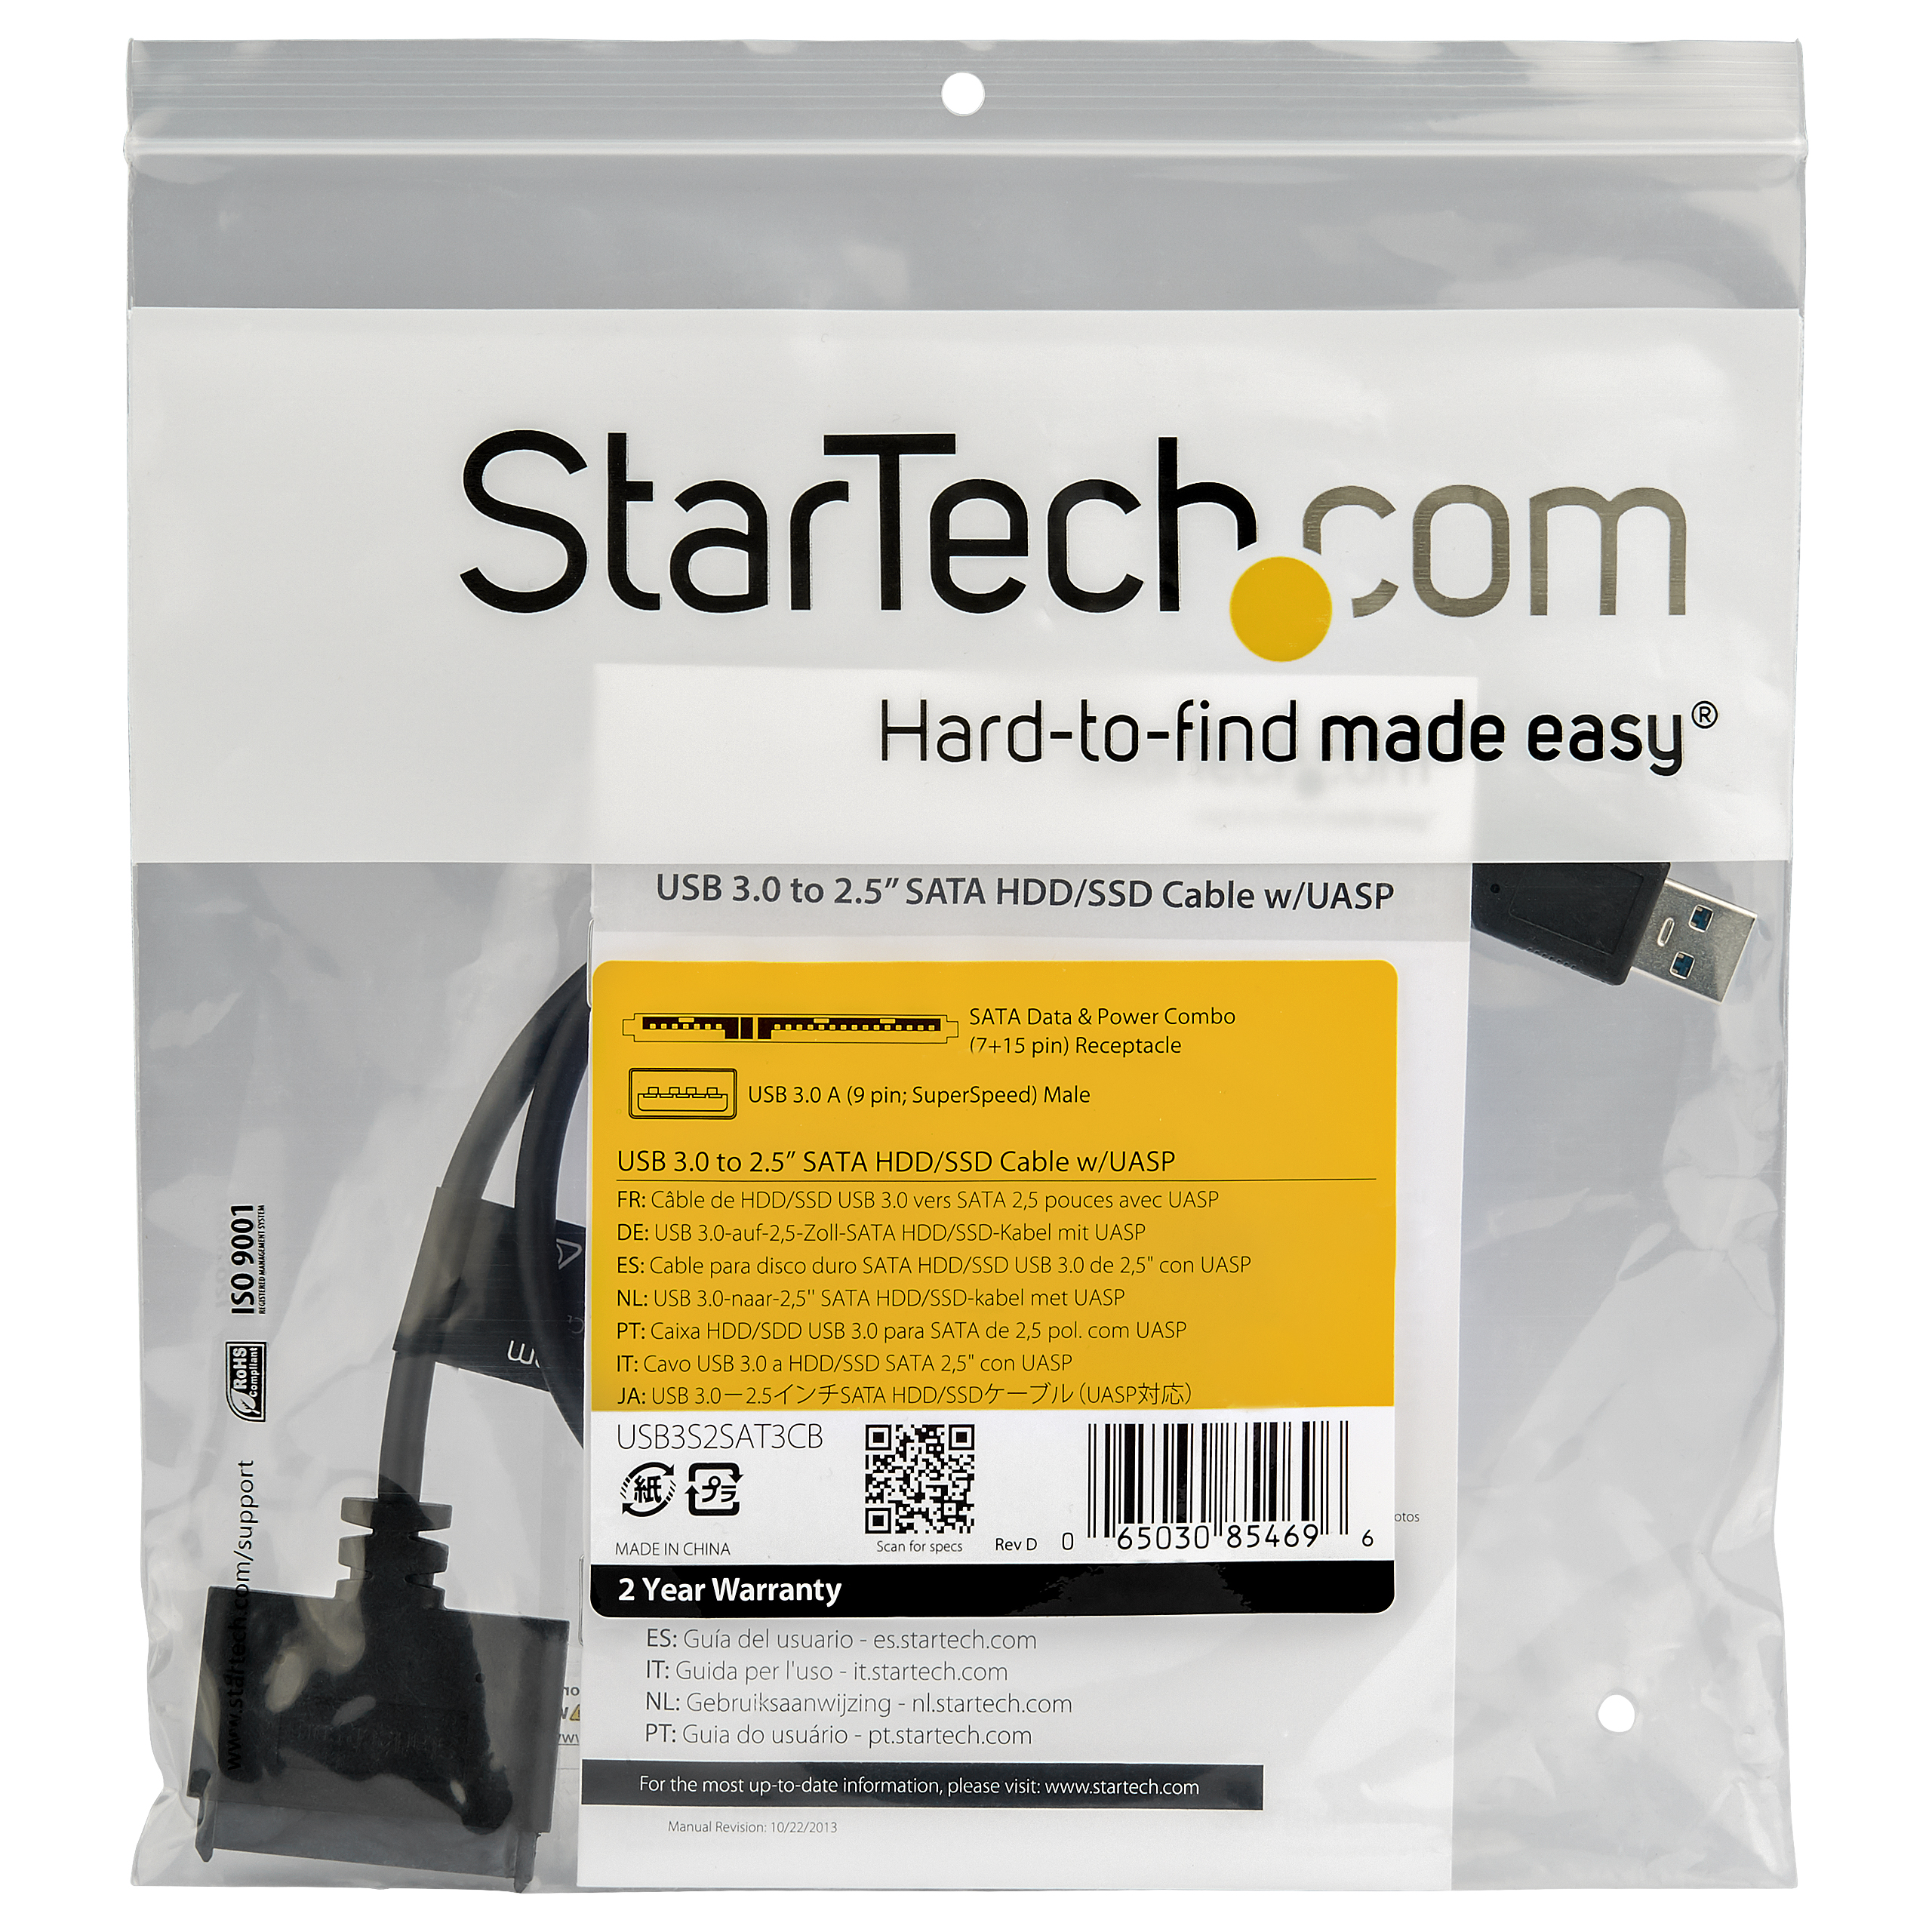 StarTech.com SATA to USB Cable - USB 3.0 to 2.5” SATA III Hard Drive Adapter - External Converter for SSD/HDD Data Transfer - image 5 of 5